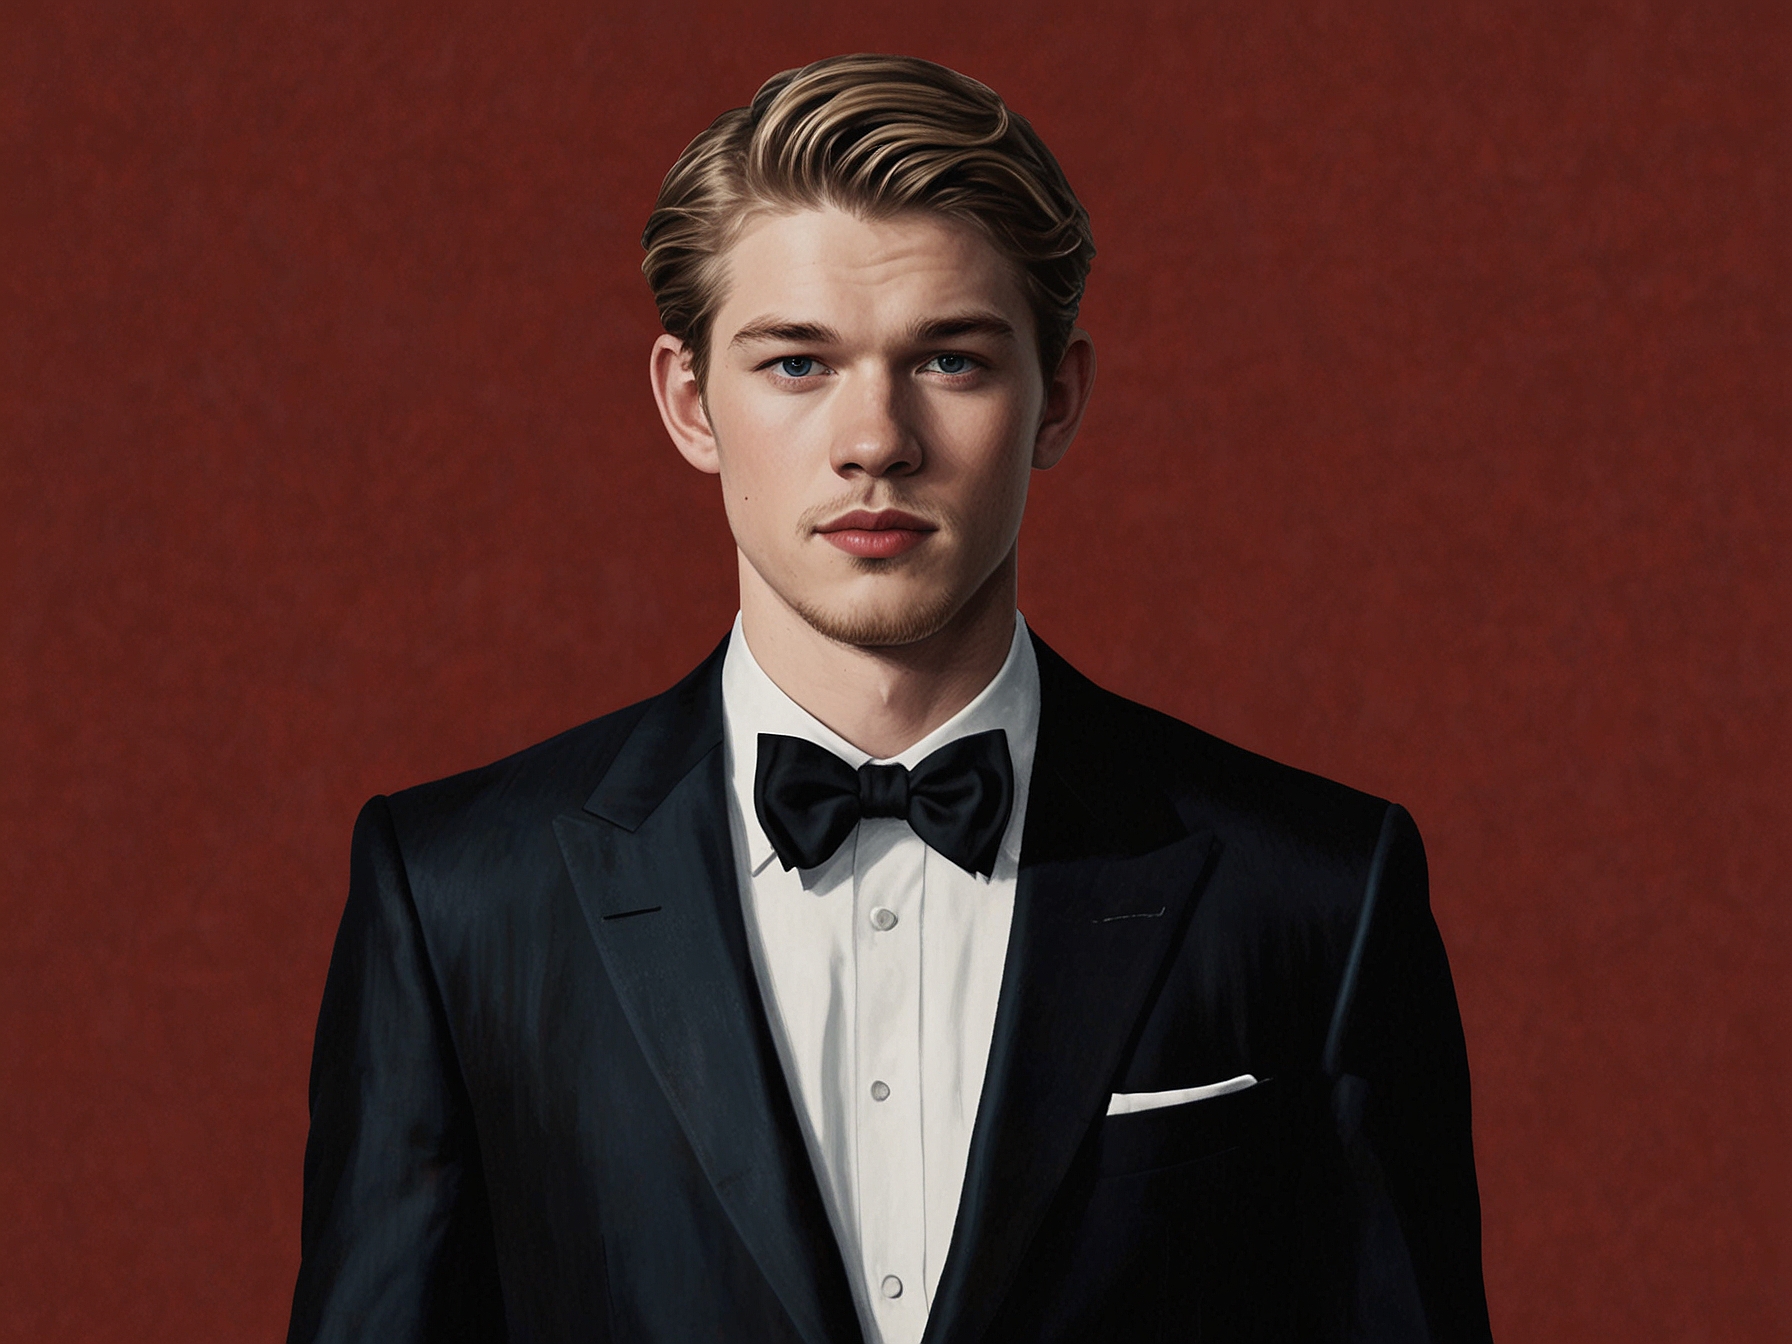 Joe Alwyn poses on the red carpet at a prestigious award show, looking dapper in a tailored suit.